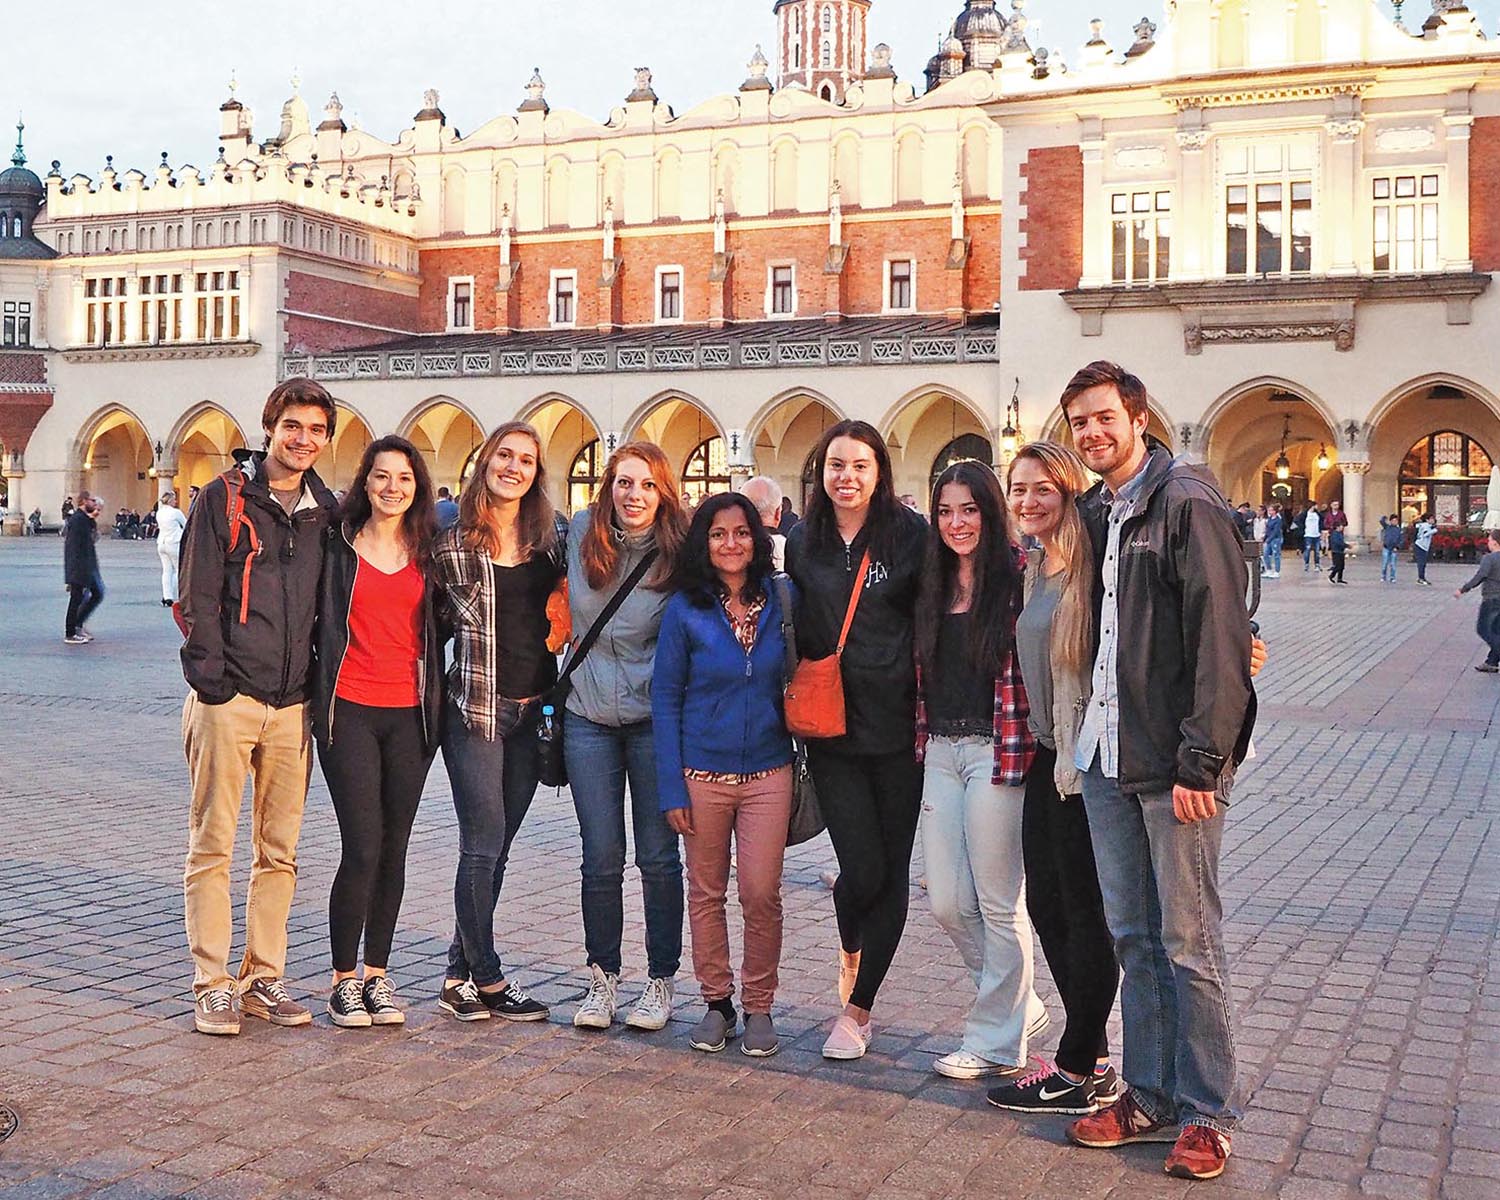 Group of students abroad, standing in a courtyard.